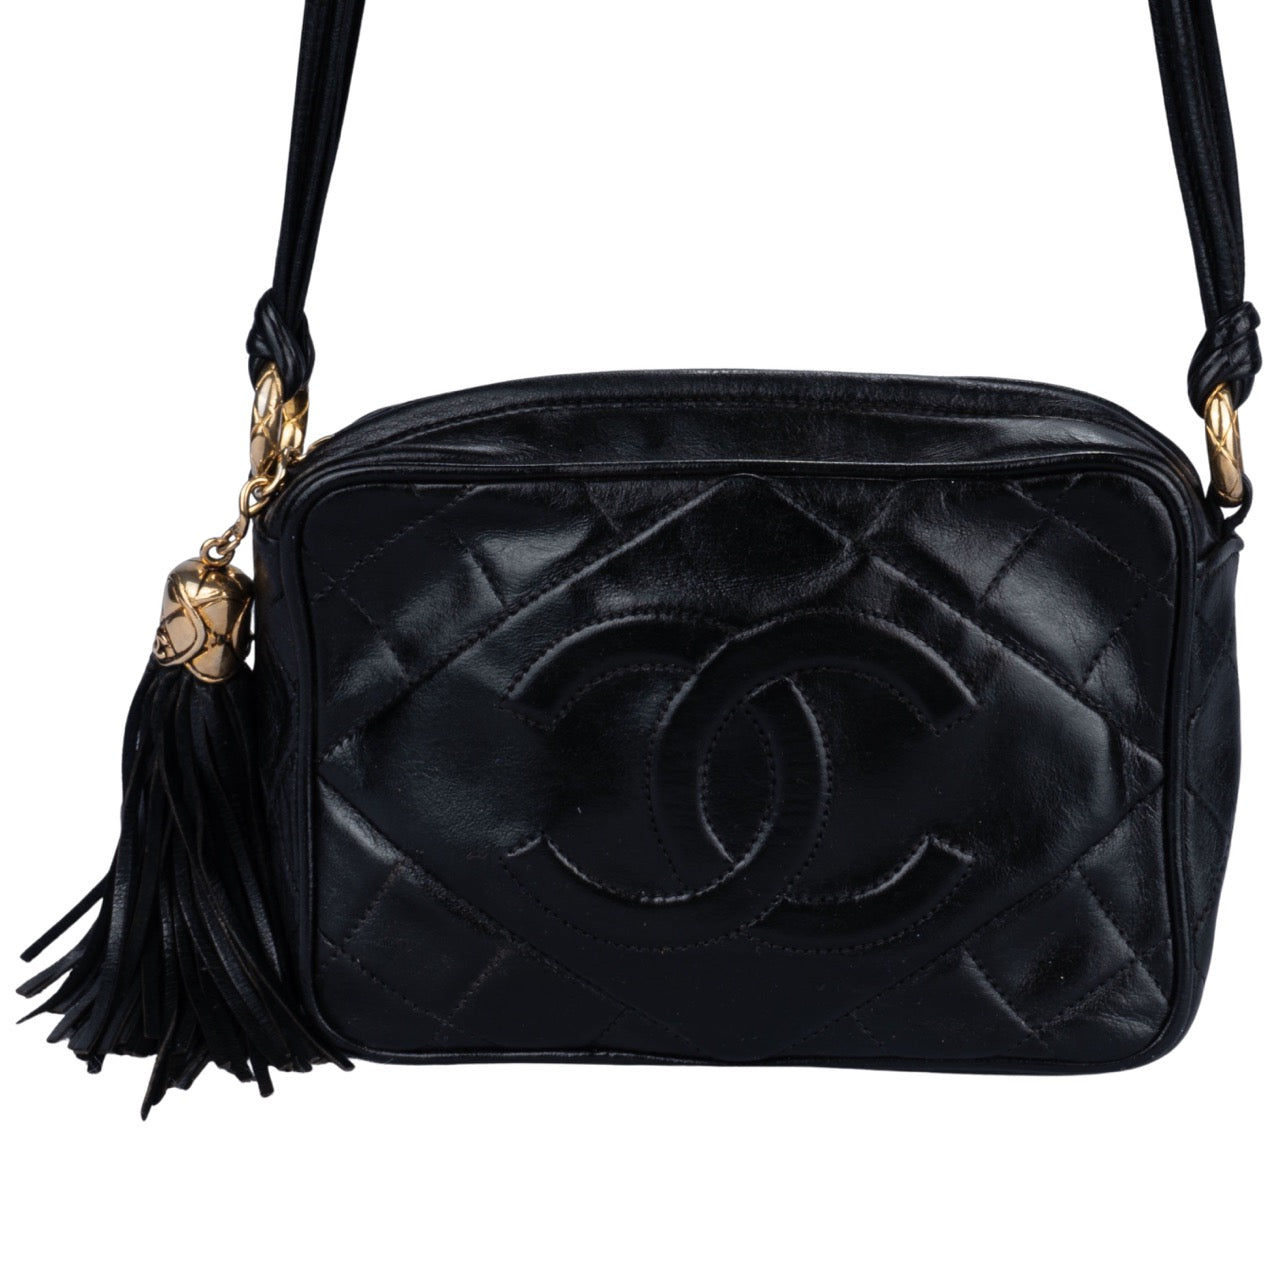 Chanel Quilted Lambskin Mini Crossbody Bag